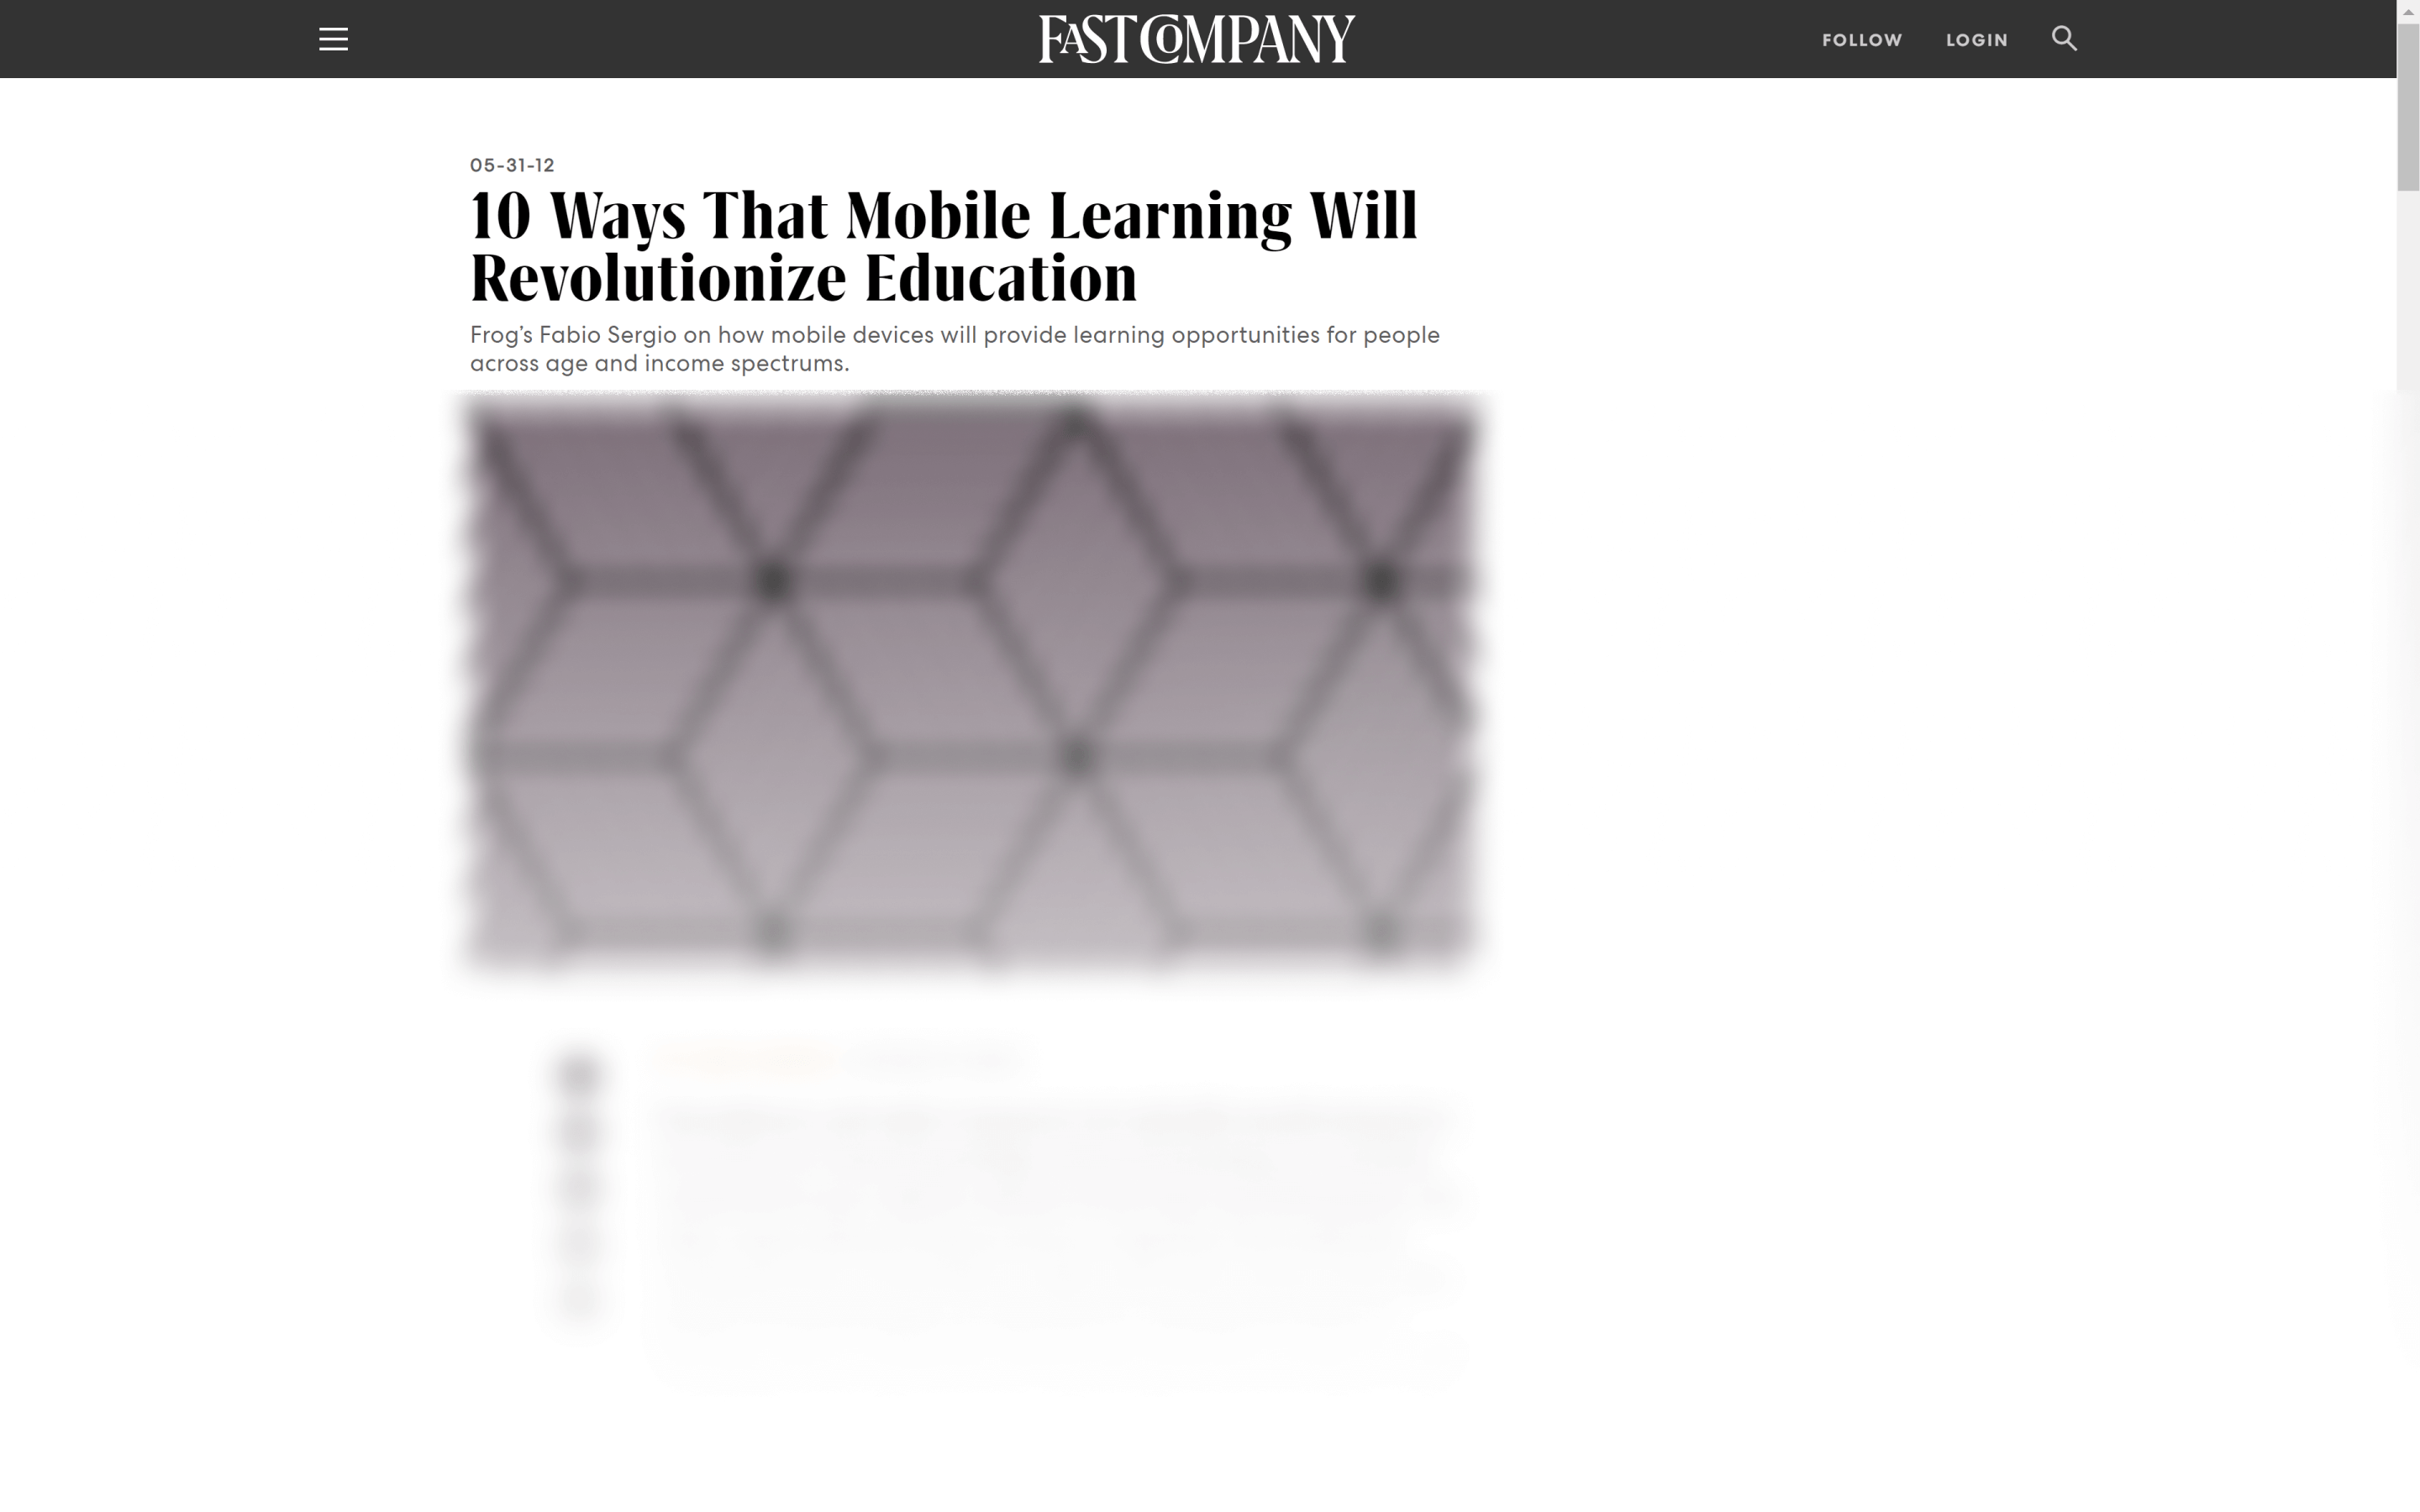 10 ways that mobile learning will revolutionize education